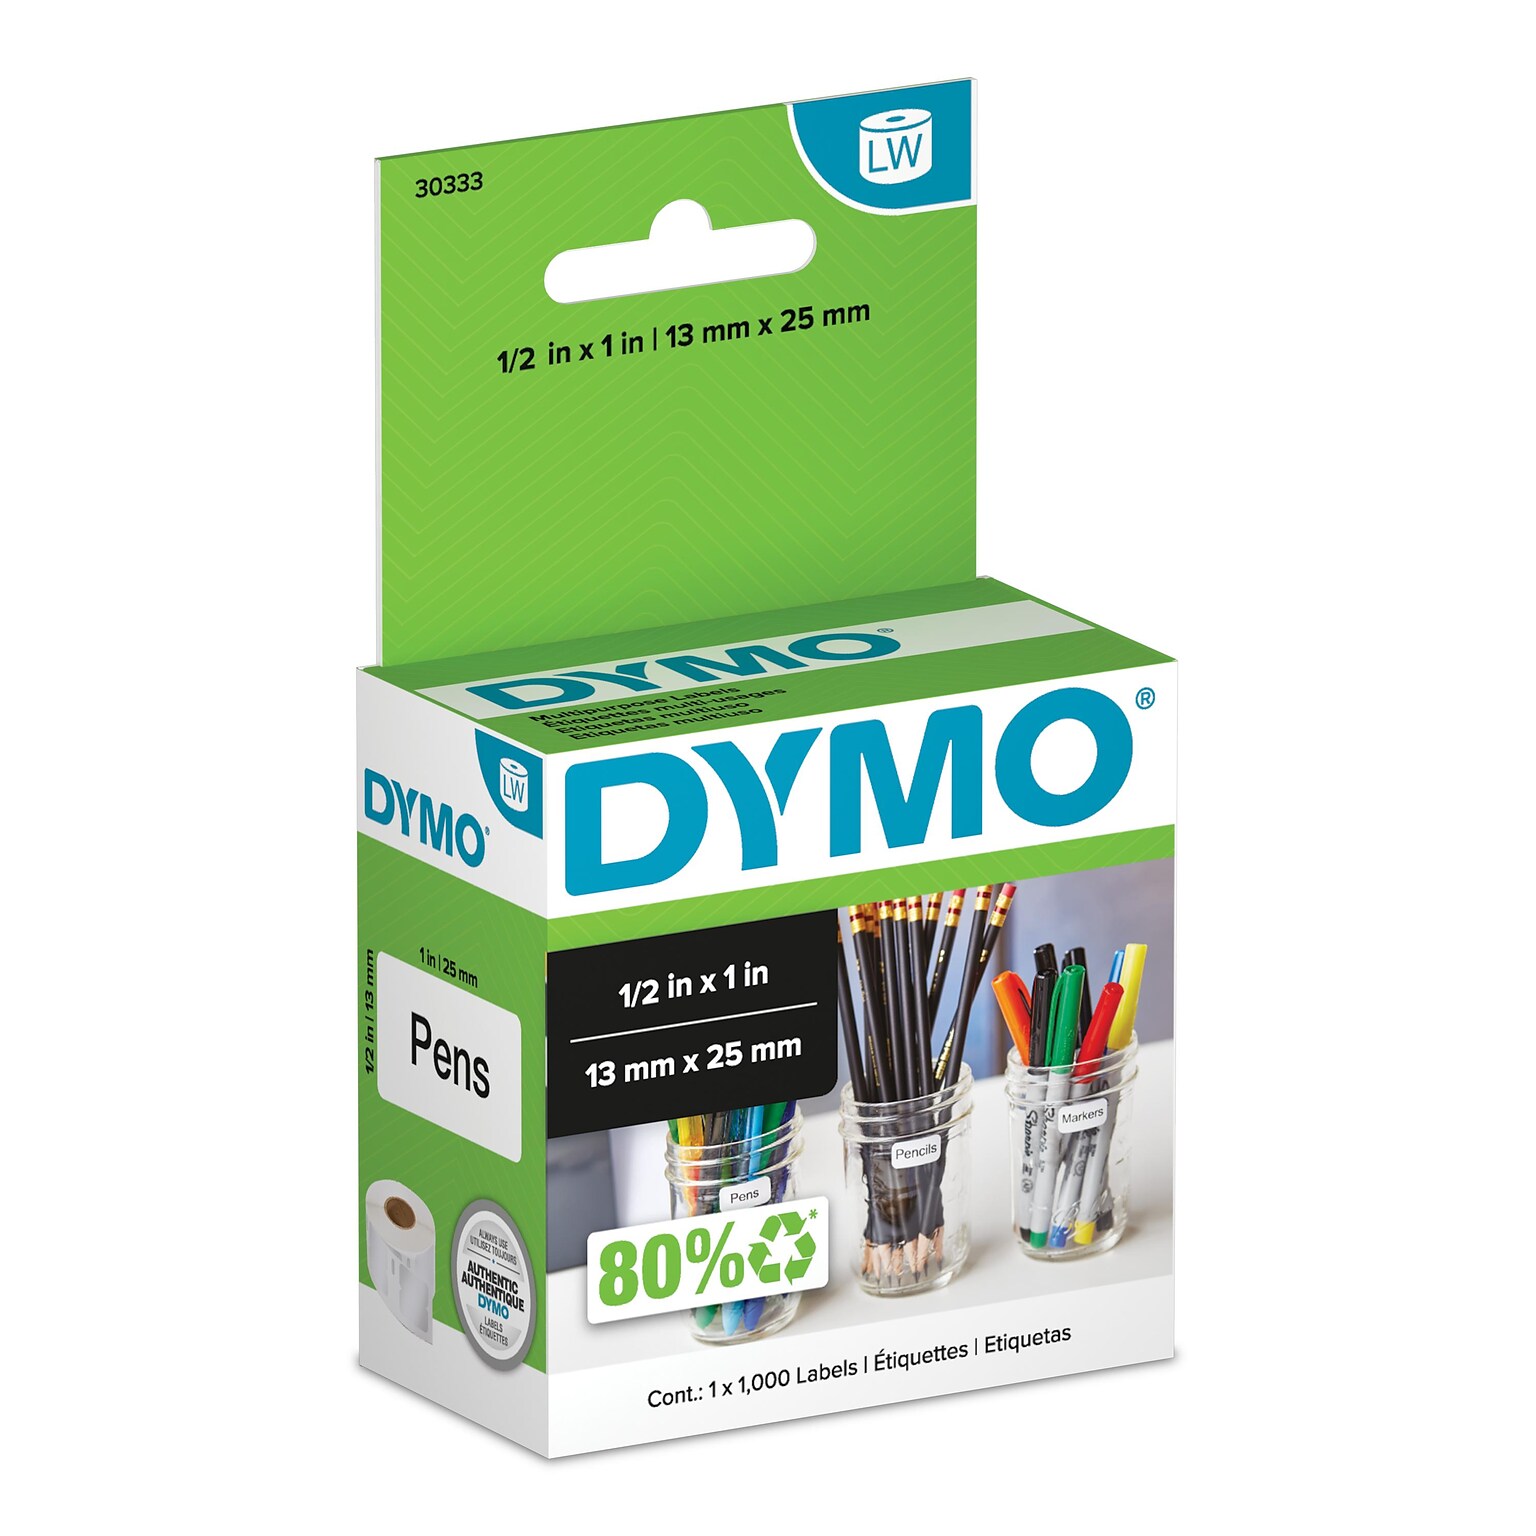 DYMO LabelWriter 30222 Multi-Purpose Labels, 1 x 1/2, Black on White, 1,000 Labels/Roll (30333)